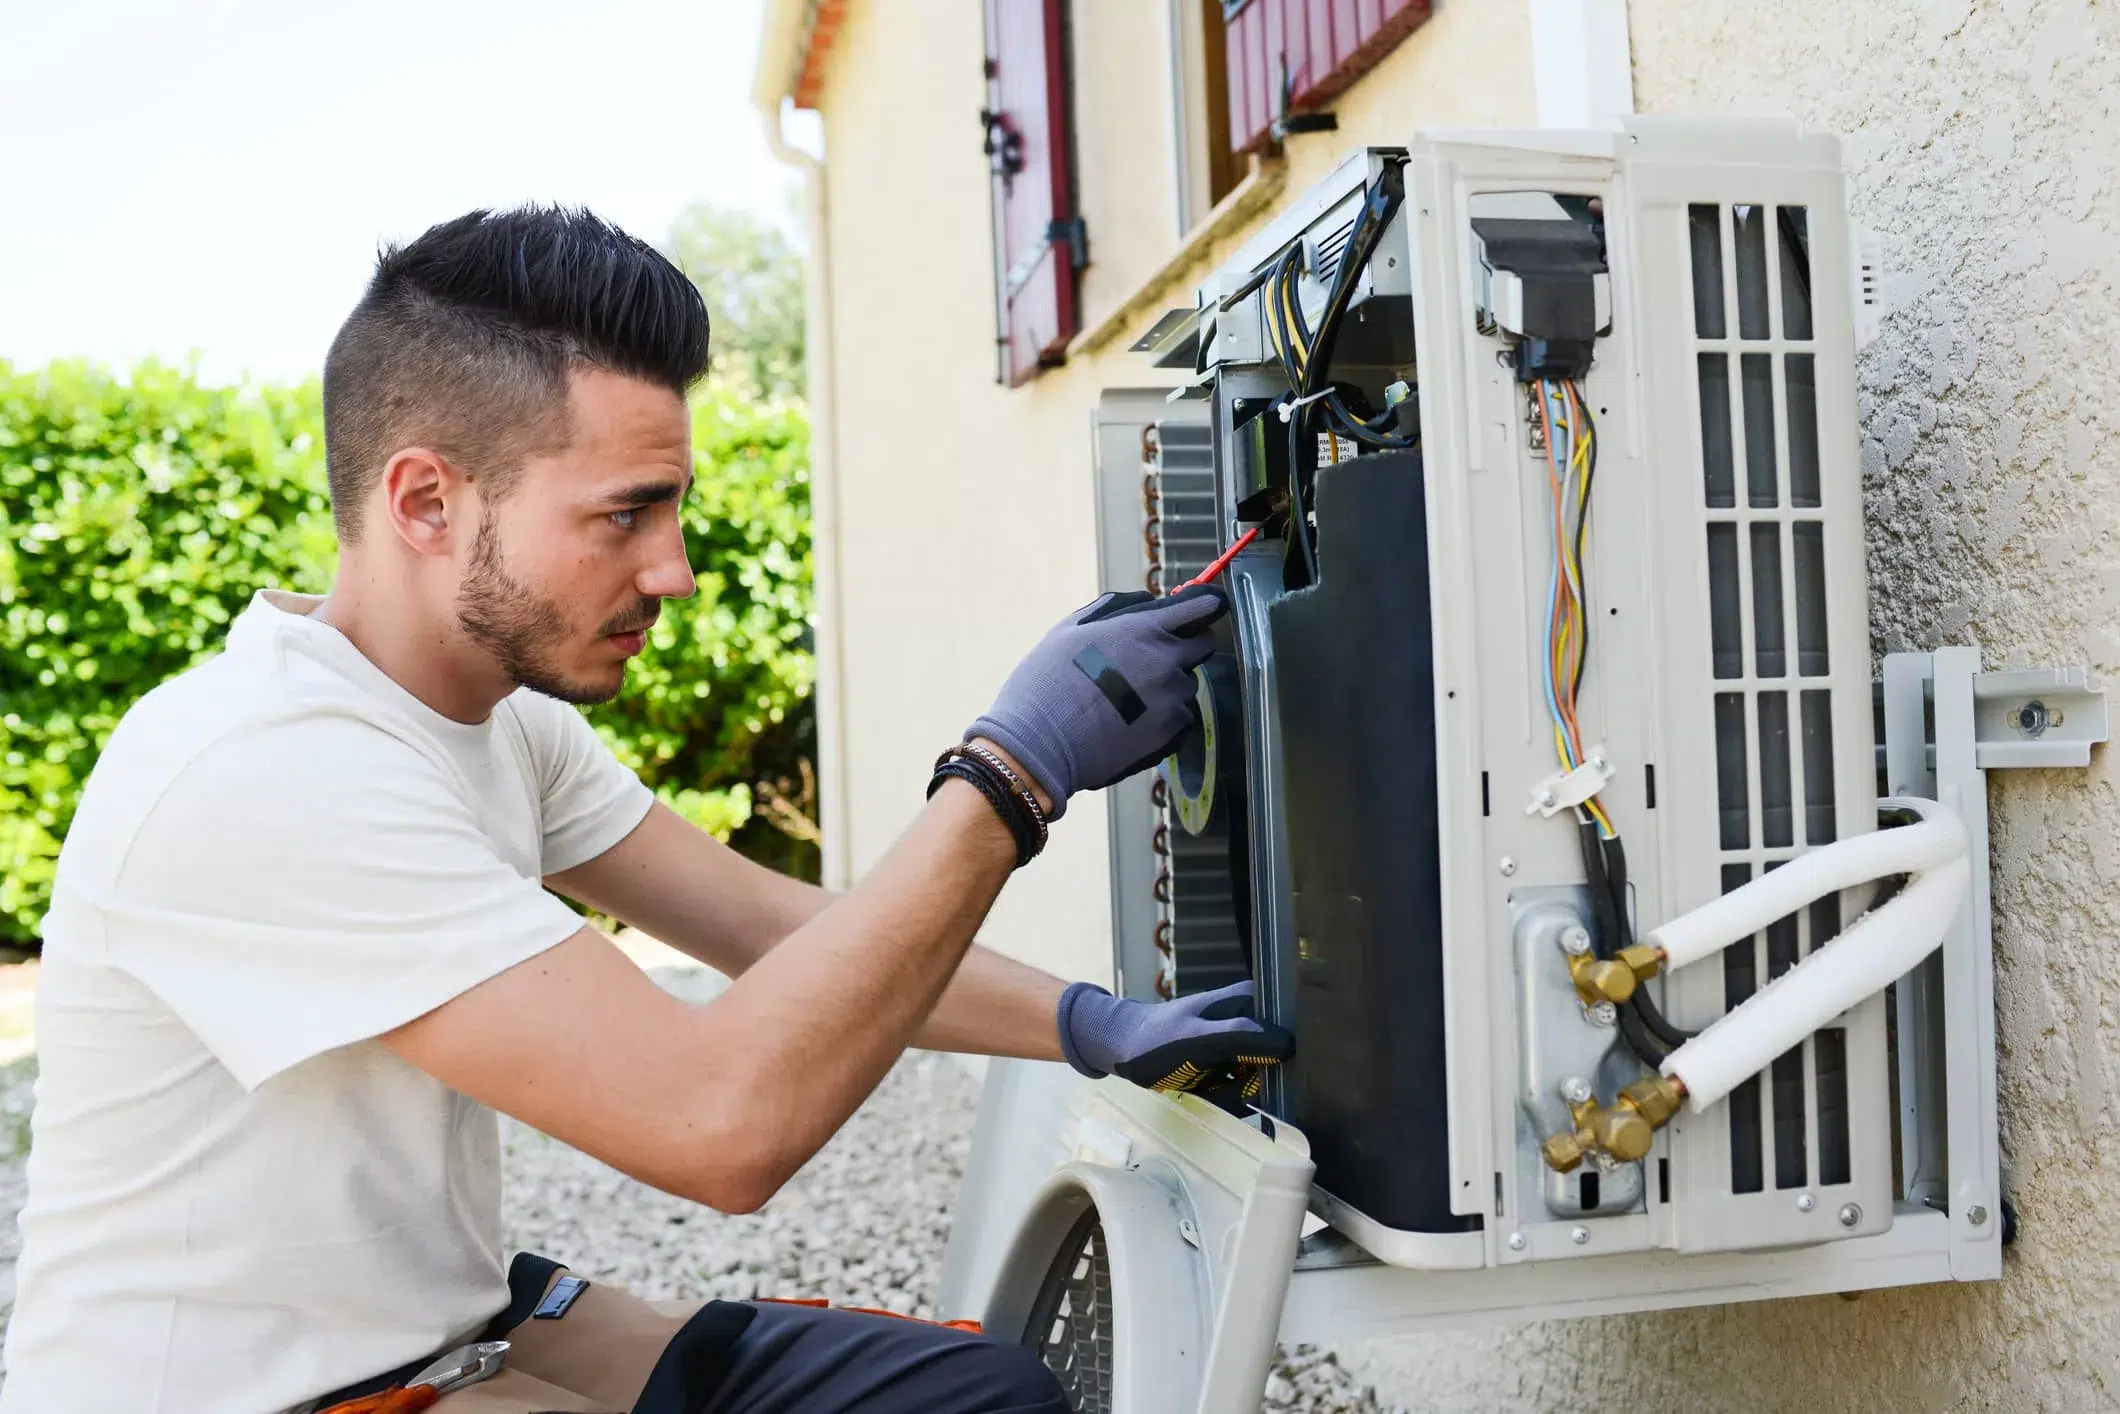 Heating repair service in Mission Viejo